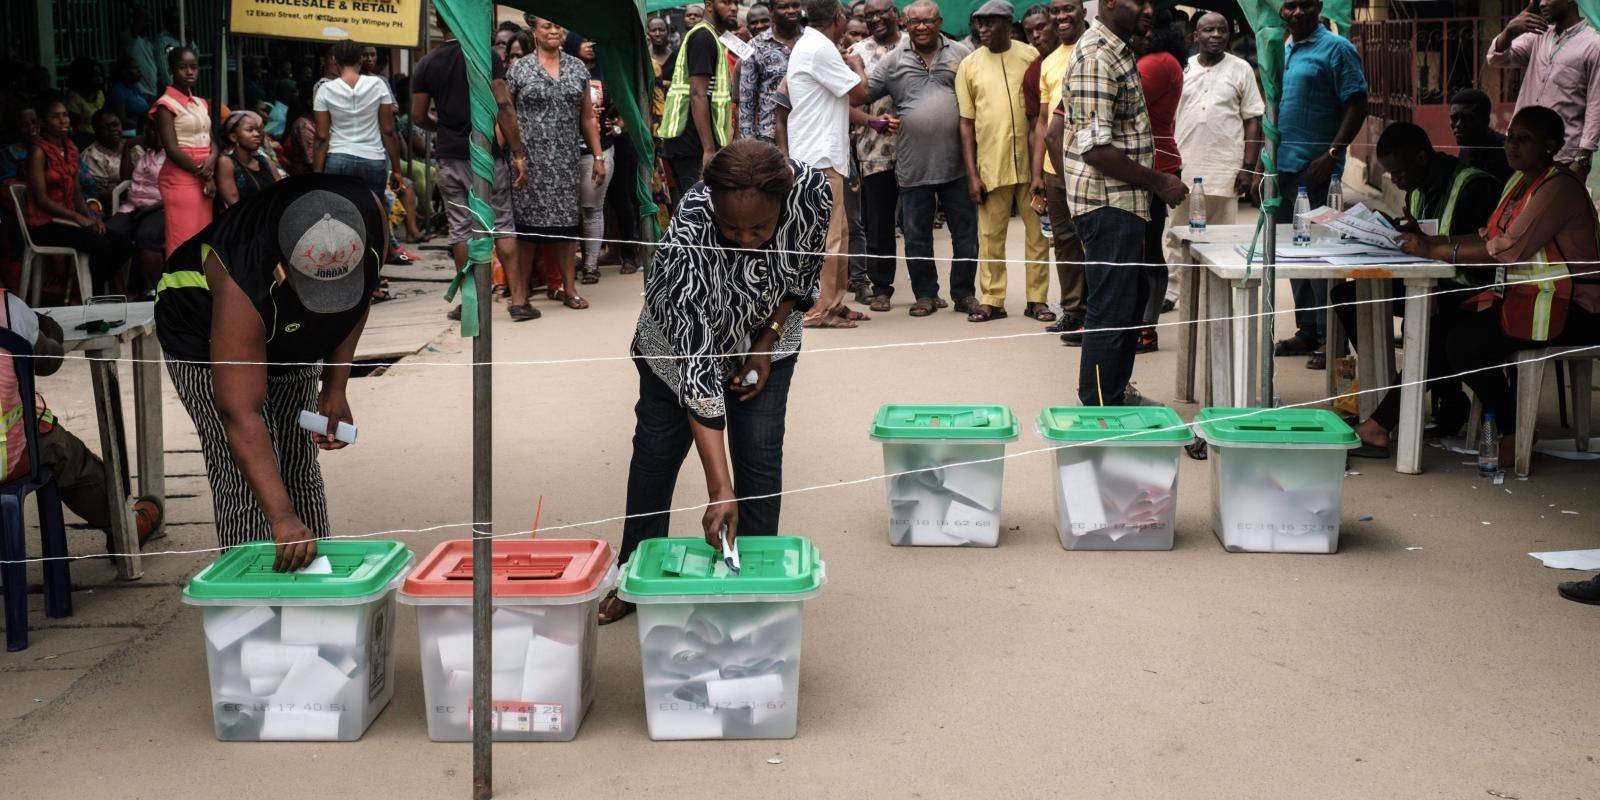 Qualification for Registration for Election in Nigeria